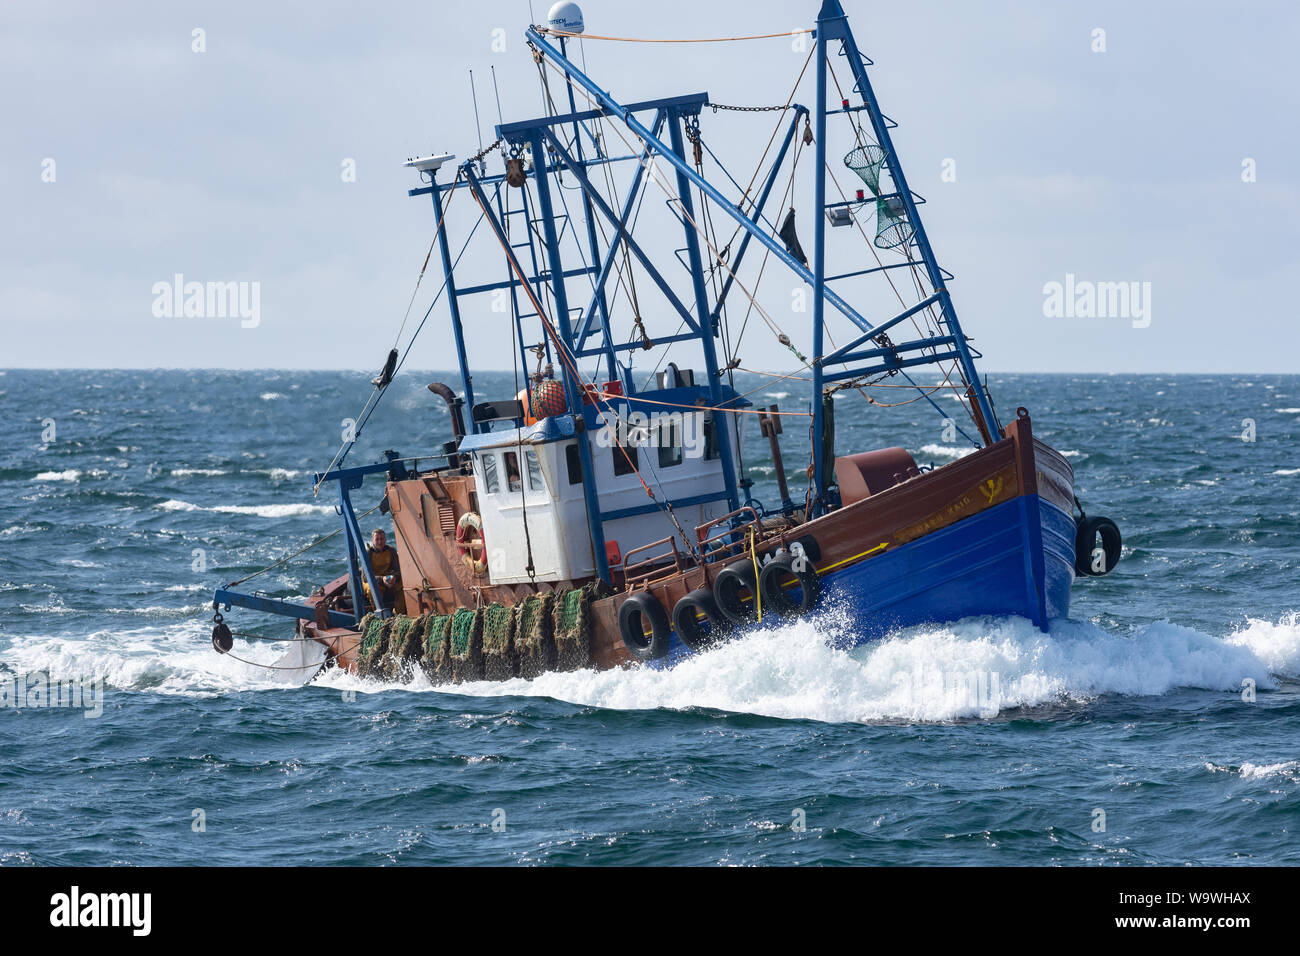 Scallop dredger boat ploughs through waves at sea with sunny skies behind, off the west coast of Scotland, with the dredges hanging off the side Stock Photo